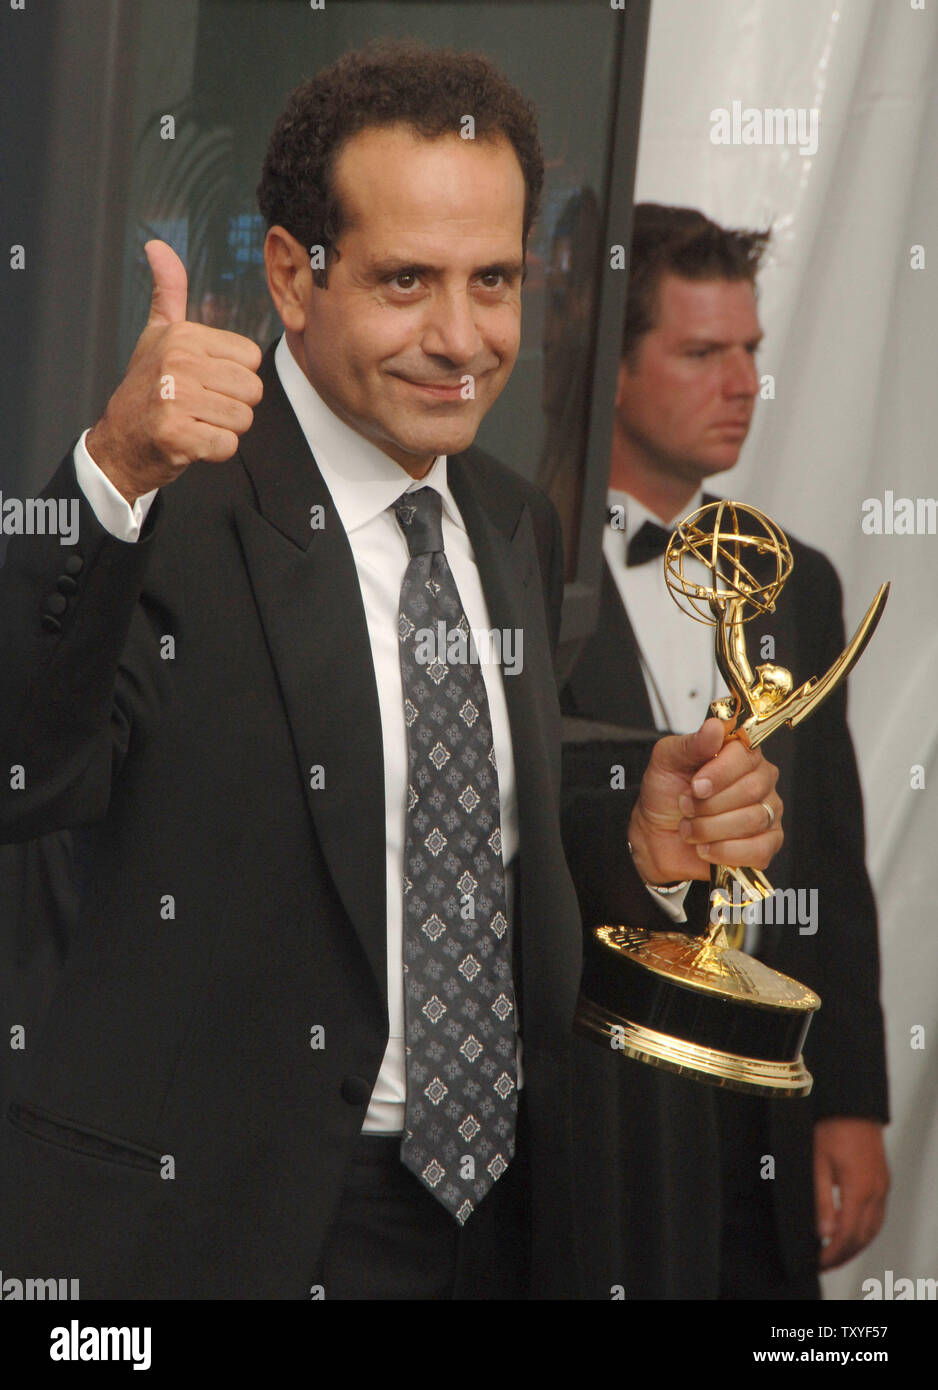 Tony Shalhoub gives a thumbs up as he holds his Emmy award for leading actor in a comedy series for 'Monk'  at the 58th annual Primetime Emmy awards at the Shrine Auditorium in Los Angeles, California on August 27, 2006. (UPI Photo/Jim Ruymen) Stock Photo